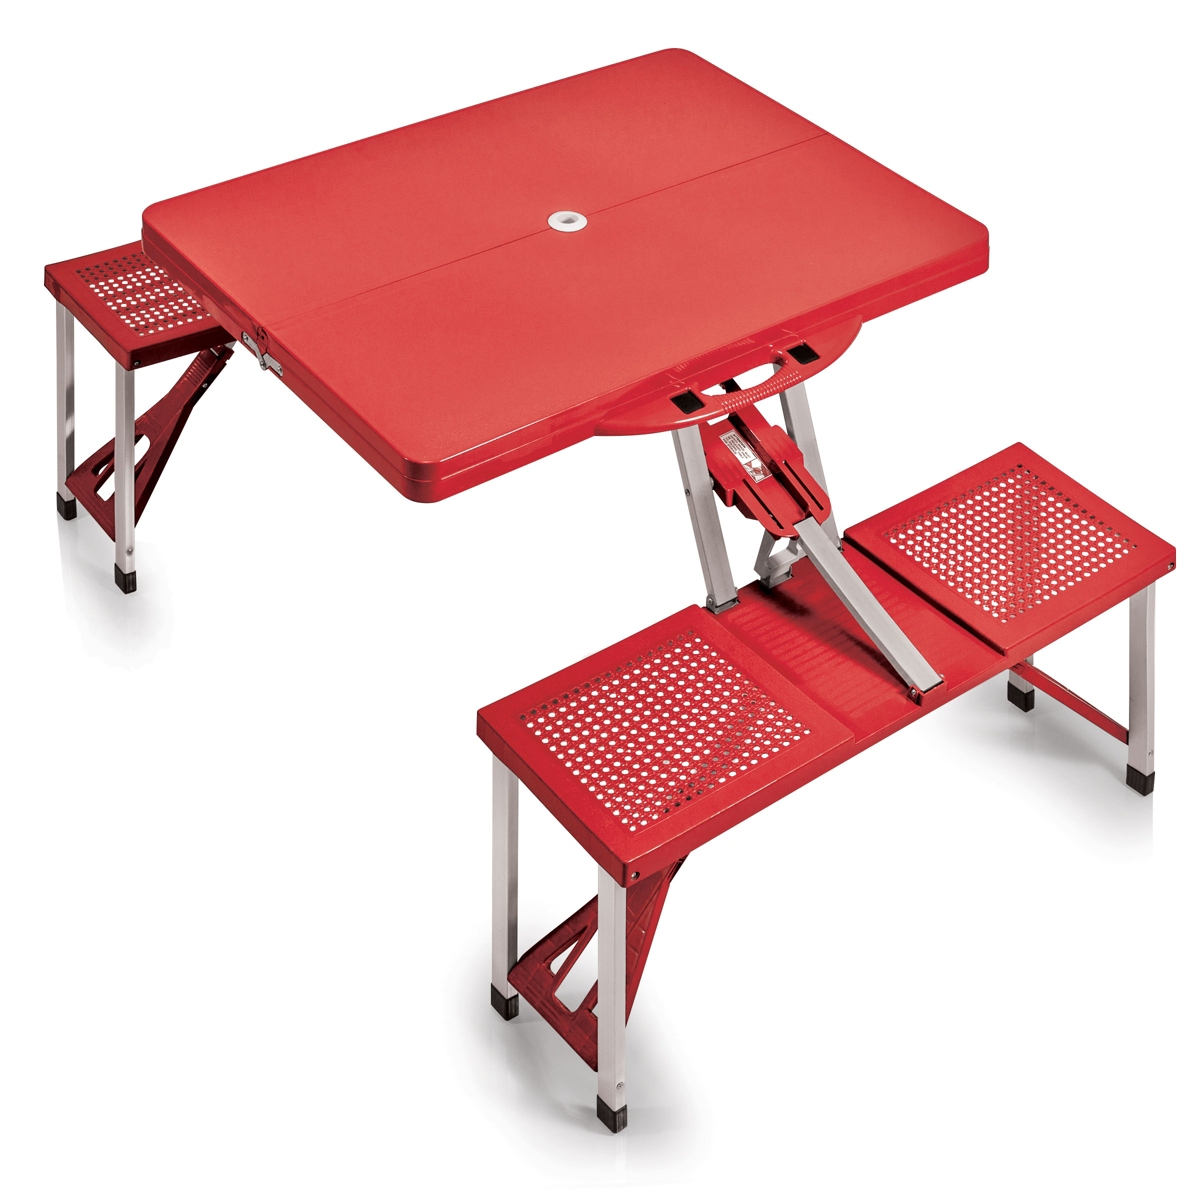 Picnic Time Oniva By Picnic Table Portable Folding Table w/ Seats & Umbrella Hole (Red or Hunter Green) $84 Black $89 + Free Shipping